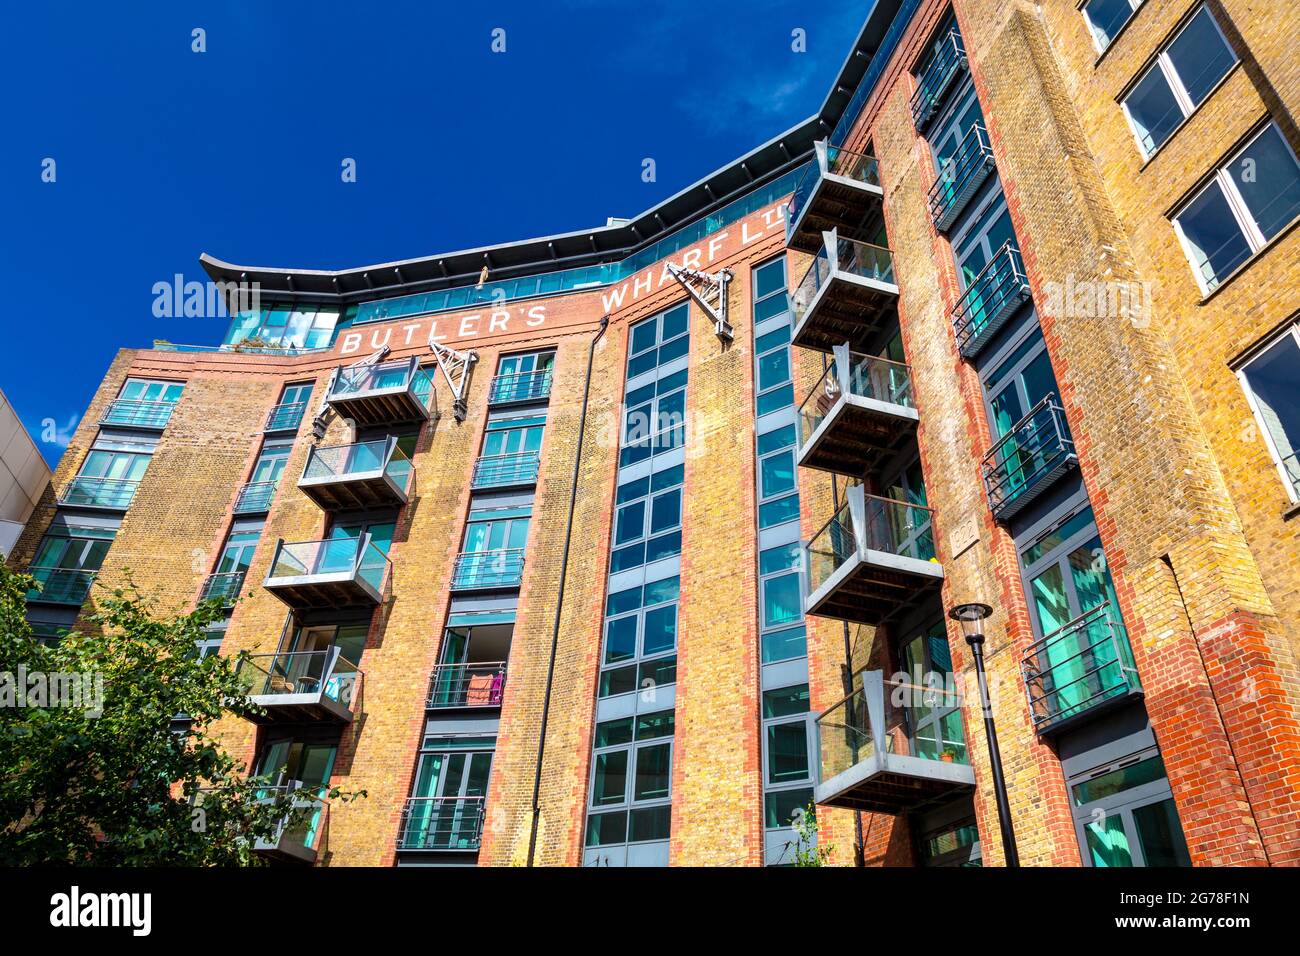 Exterior of Butler's Wharf in Shad Thames, London, UK Stock Photo